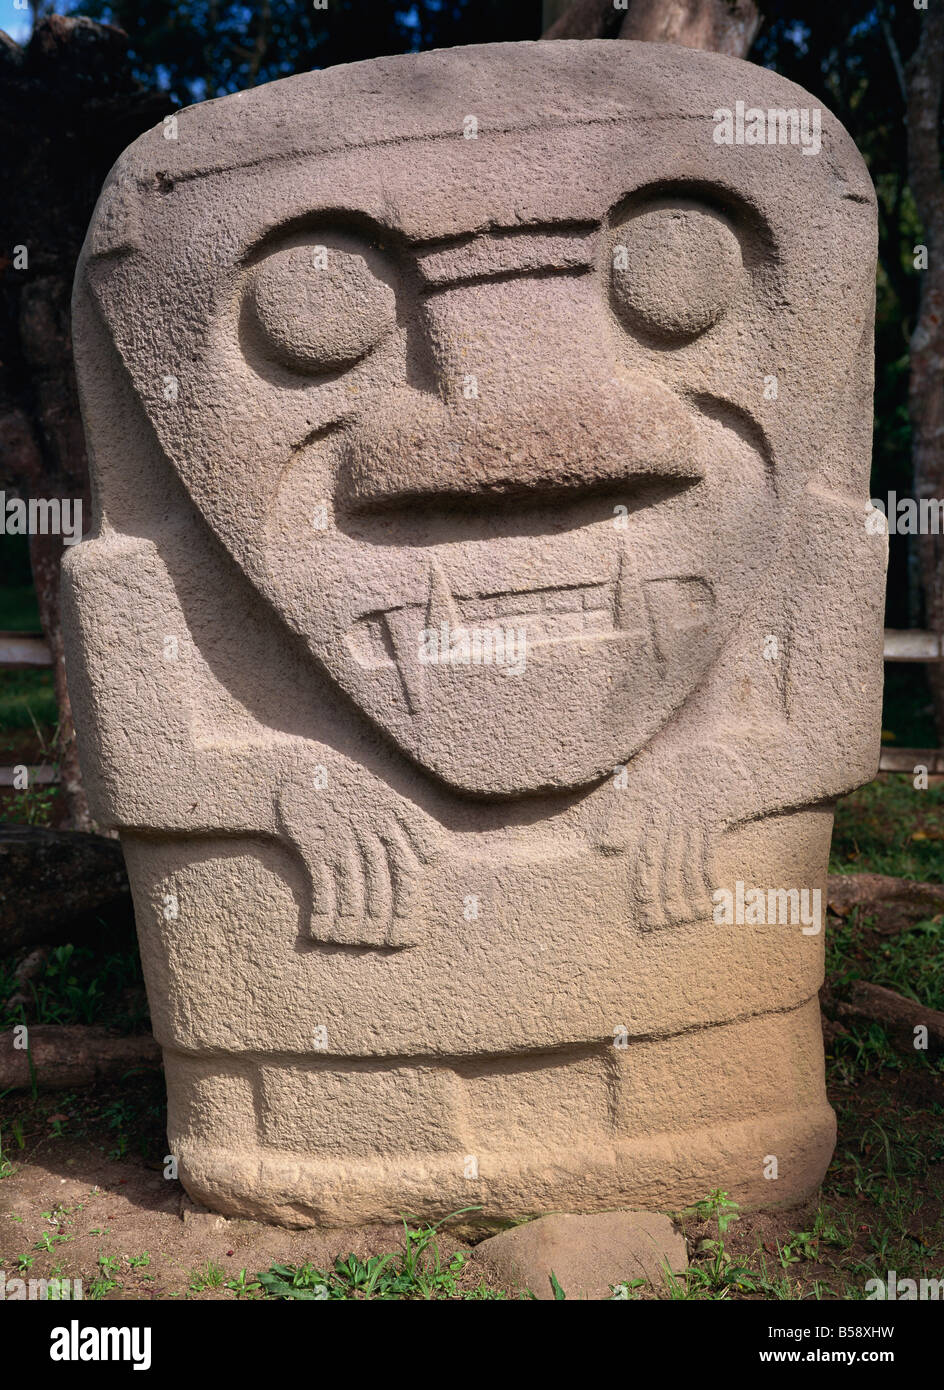 Close-up of statue with sharp teeth in the Archaeological Park at San Augustin in southwest Colombia, South America Stock Photo